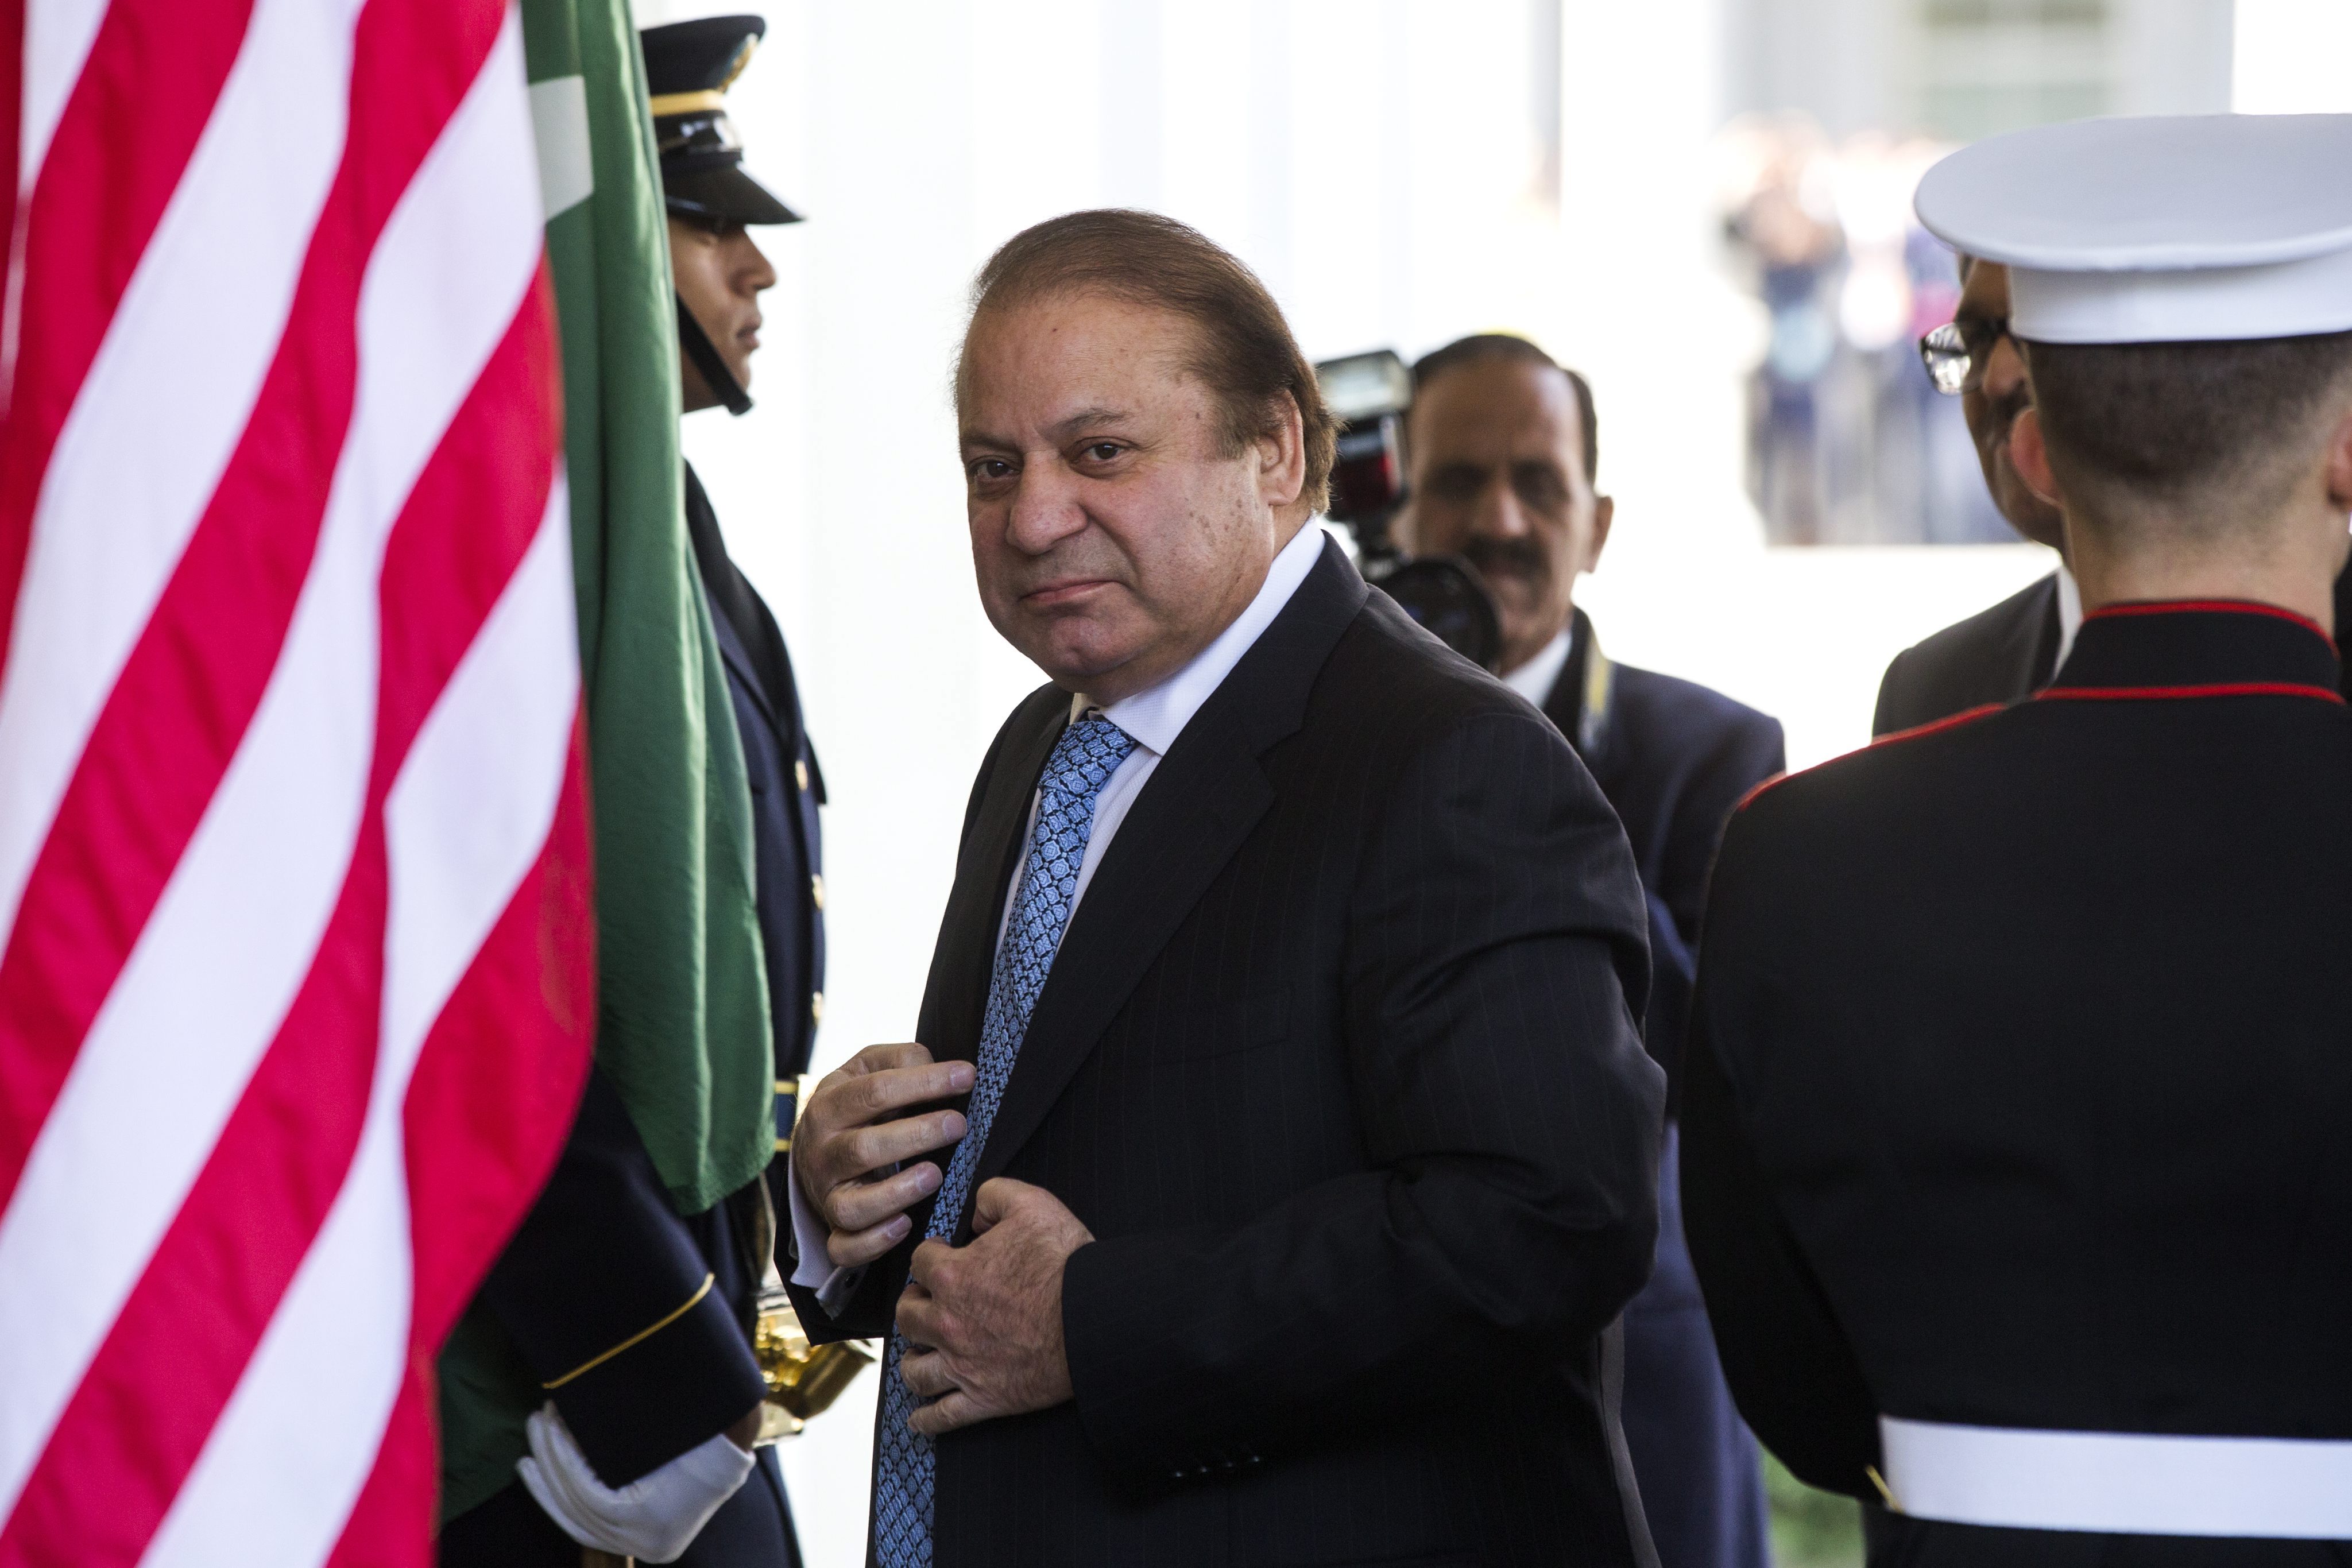 epa04989261 Prime Minister Nawaz Sharif of Pakistan (C) arrives for a bilateral meeting with US President Barack Obama at the West Wing of the White House in Washington, DC, USA, 22 October 2015. The two plan to discuss the Obama administration's decision to keep American troops in Afghanistan through much of 2016. EPA/JIM LO SCALZO